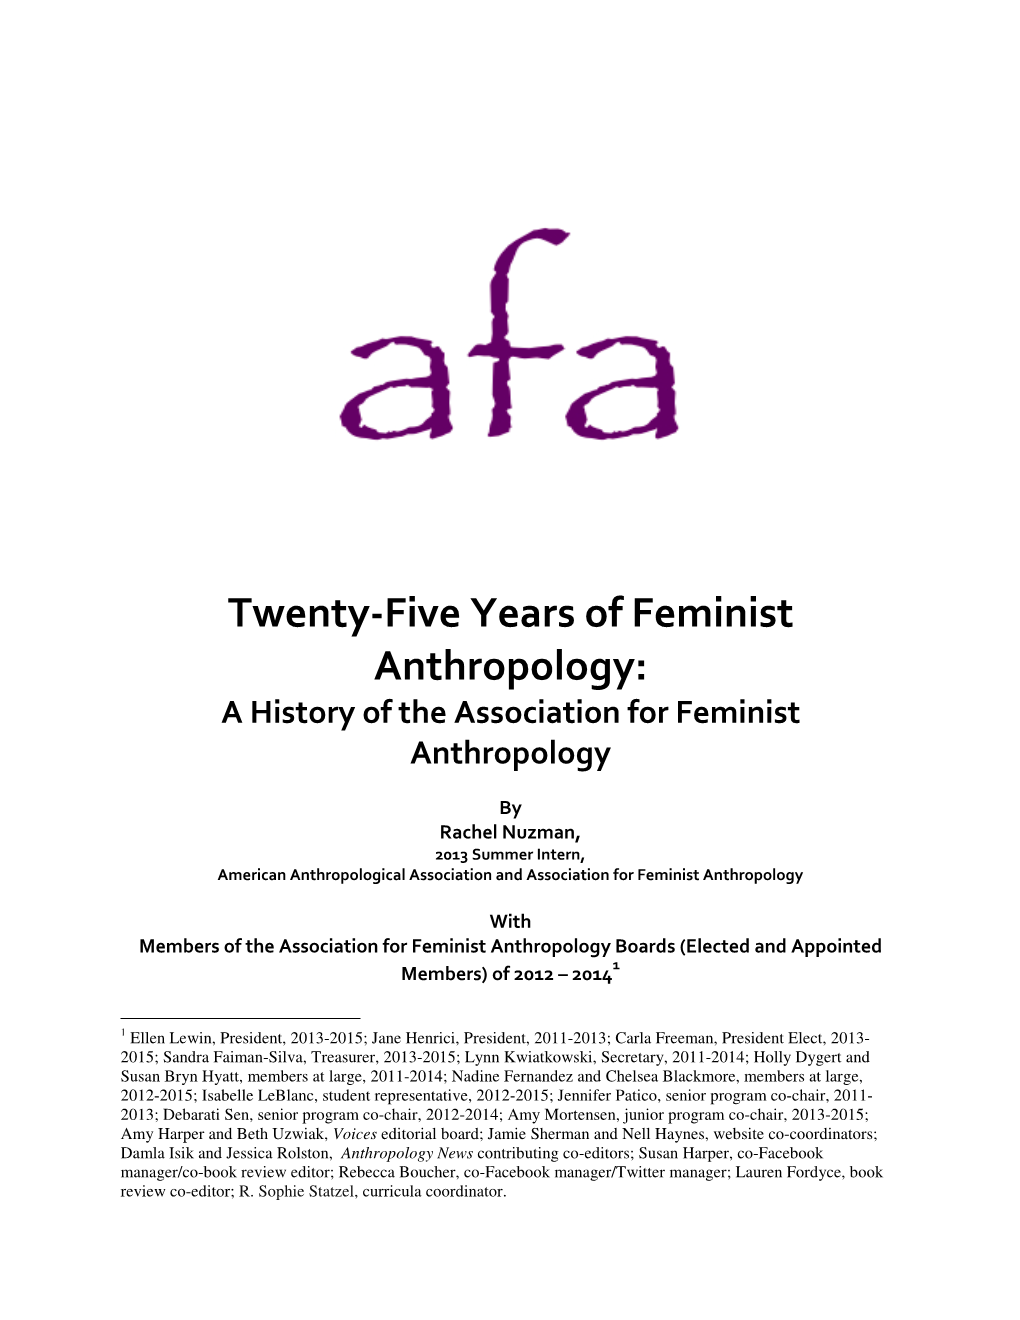 Twenty-Five Years of Feminist Anthropology: a History of the Association for Feminist Anthropology